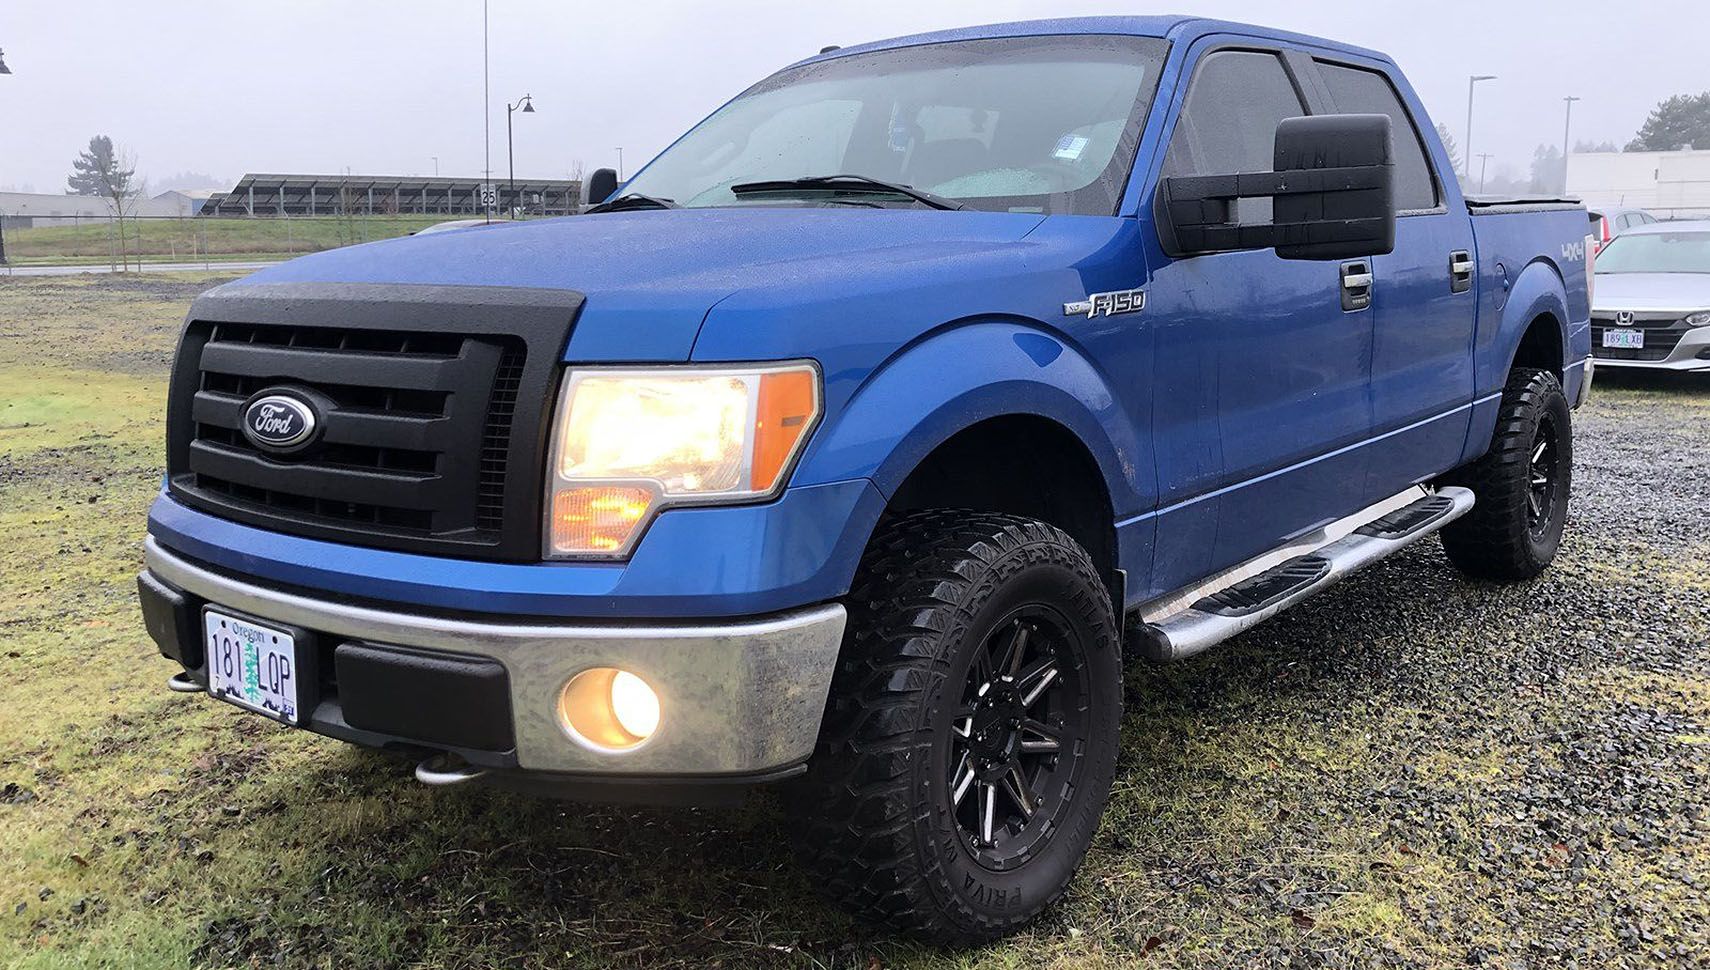 The Best Model Year Of Ford F-150 Is 2009